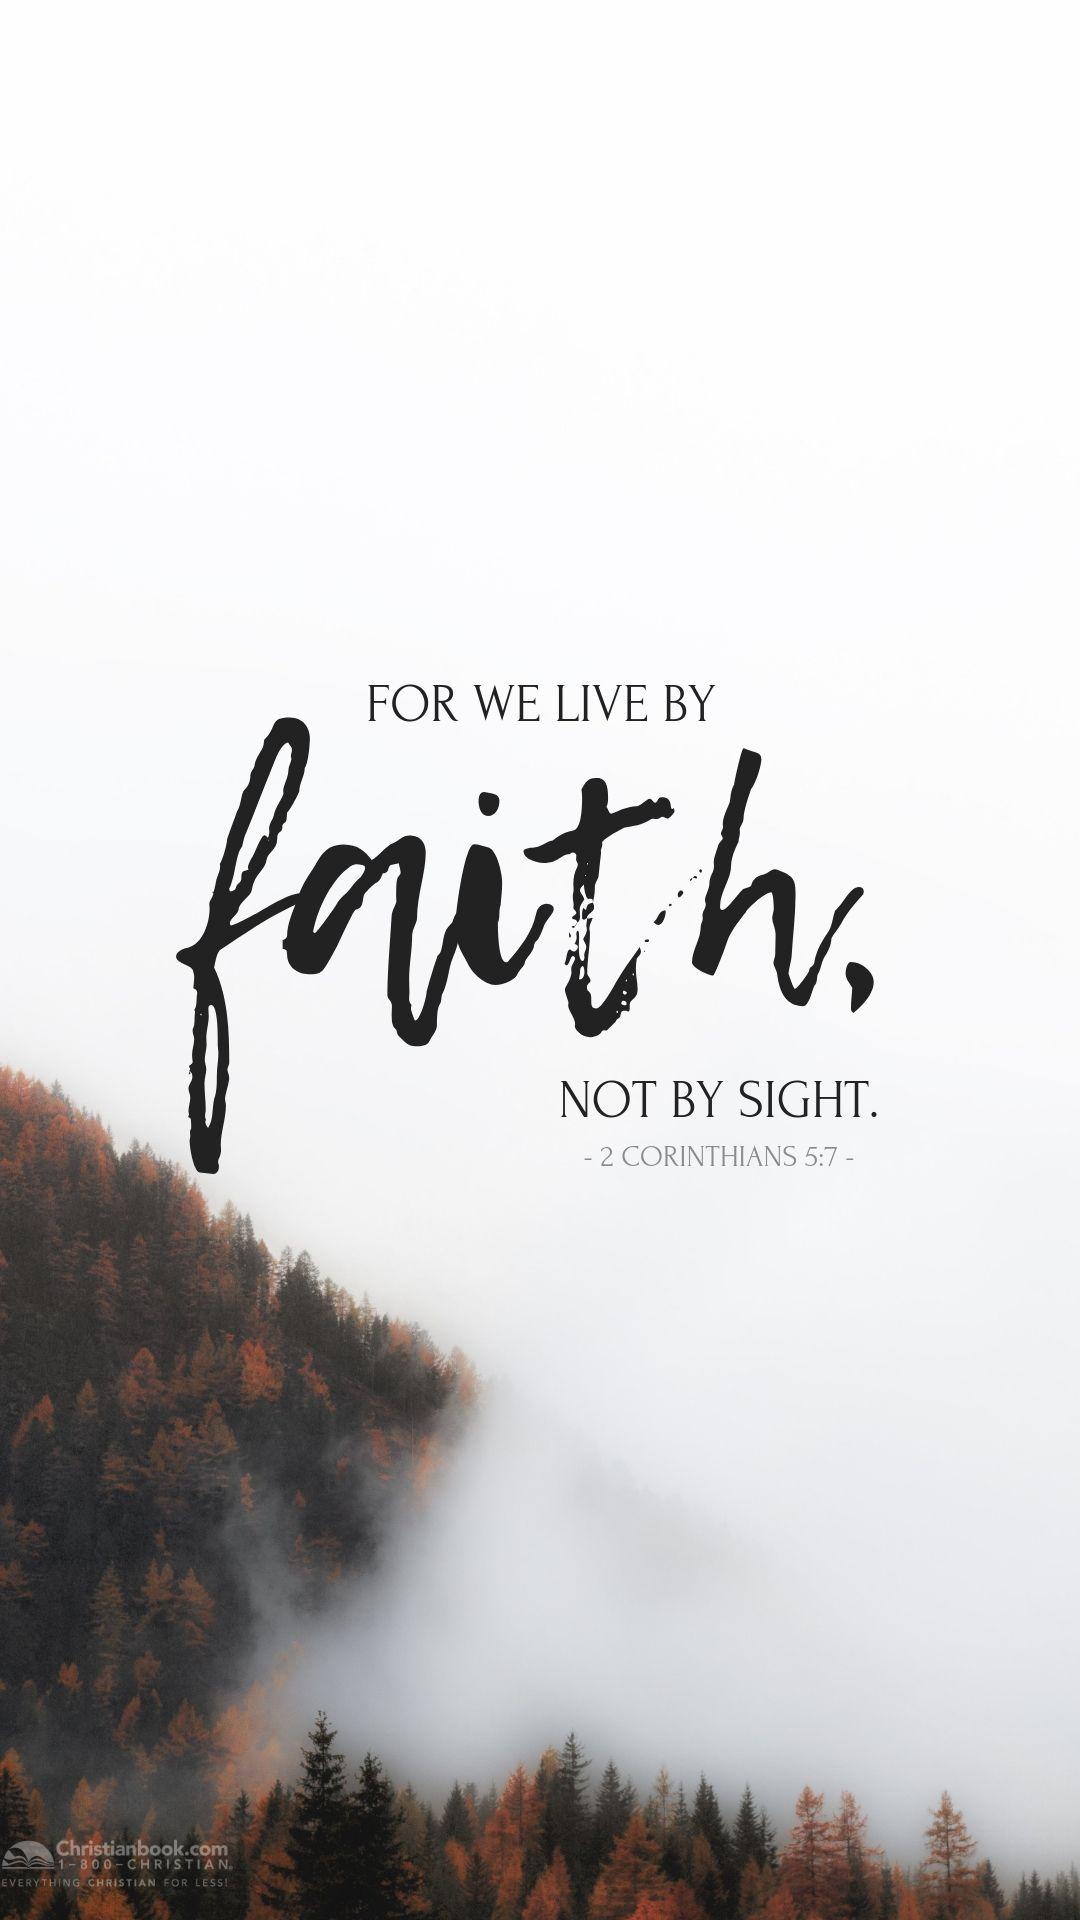 Download Free Bible Verse Phone Wallpapers Now